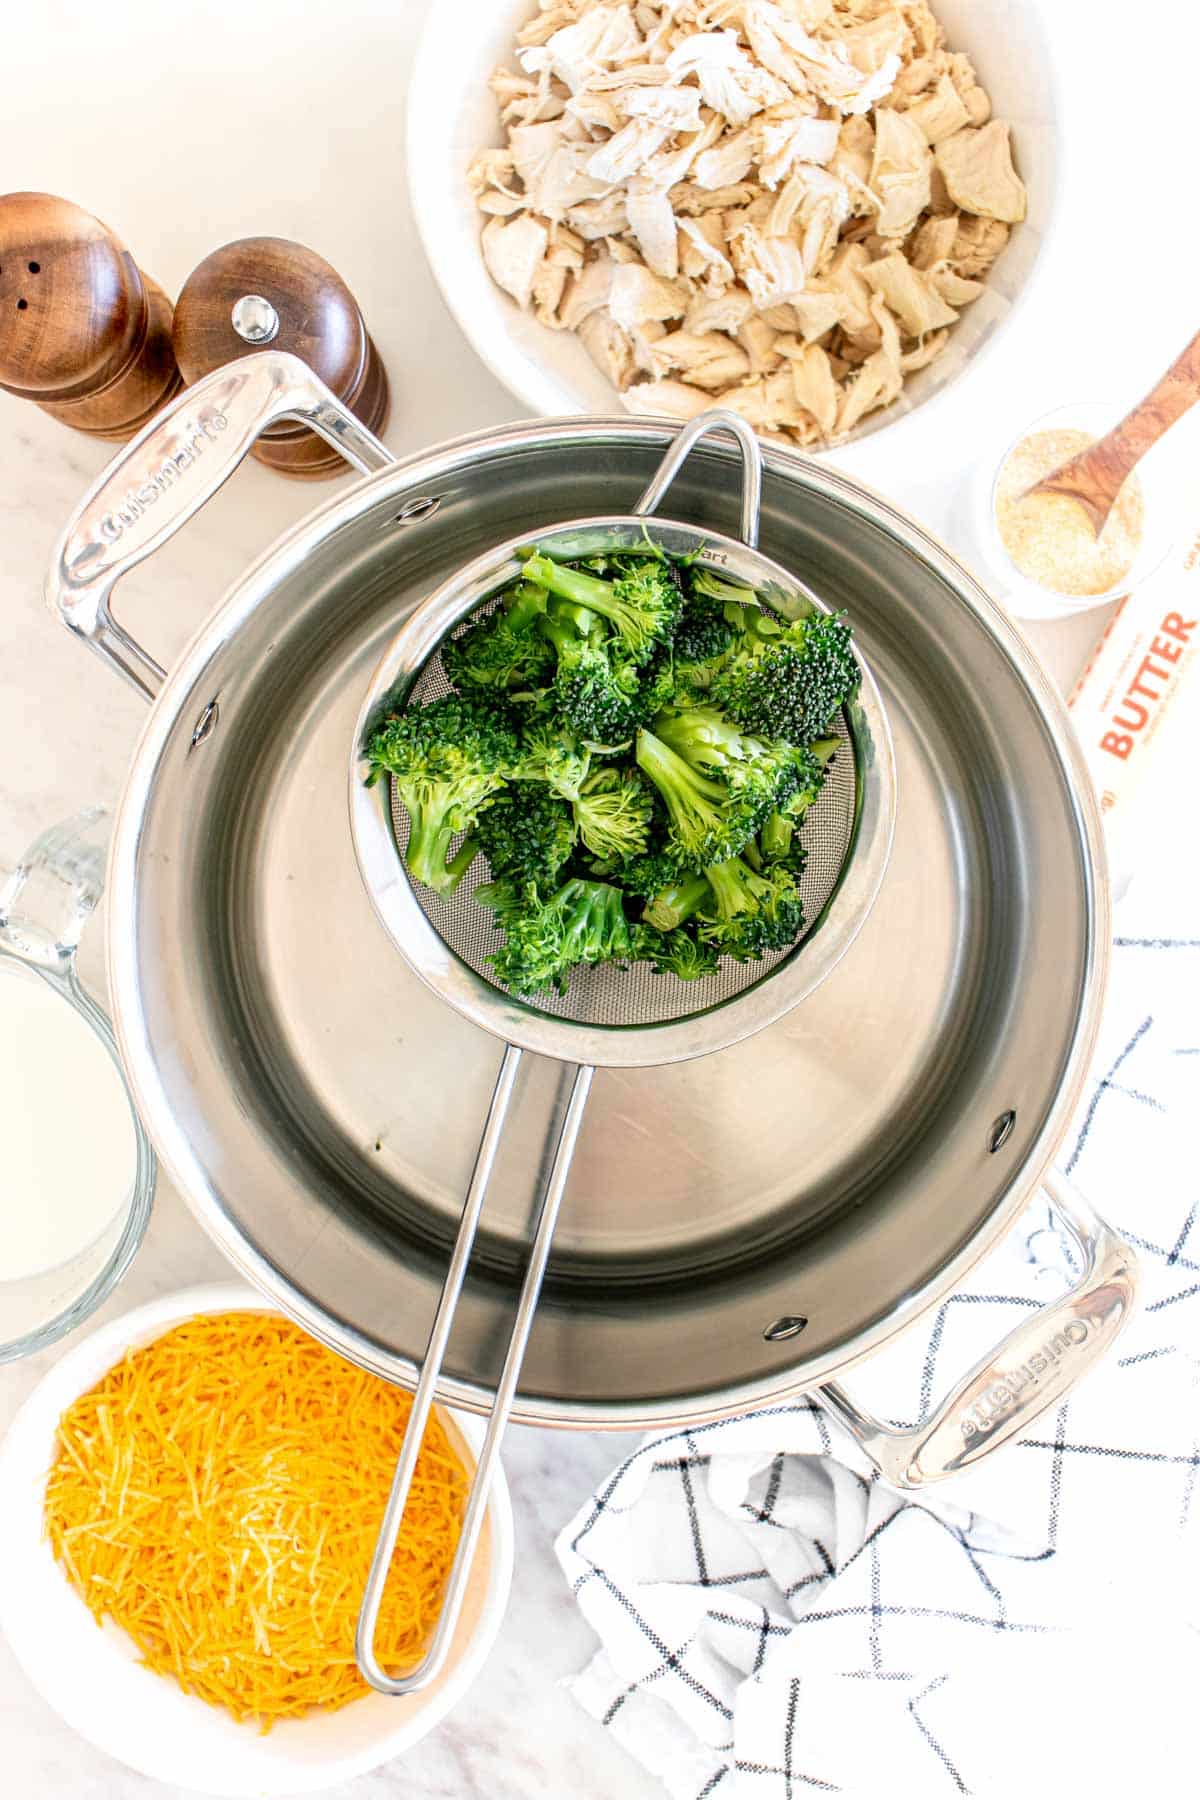 A bowl of broccoli over pan with side of shredded chicken